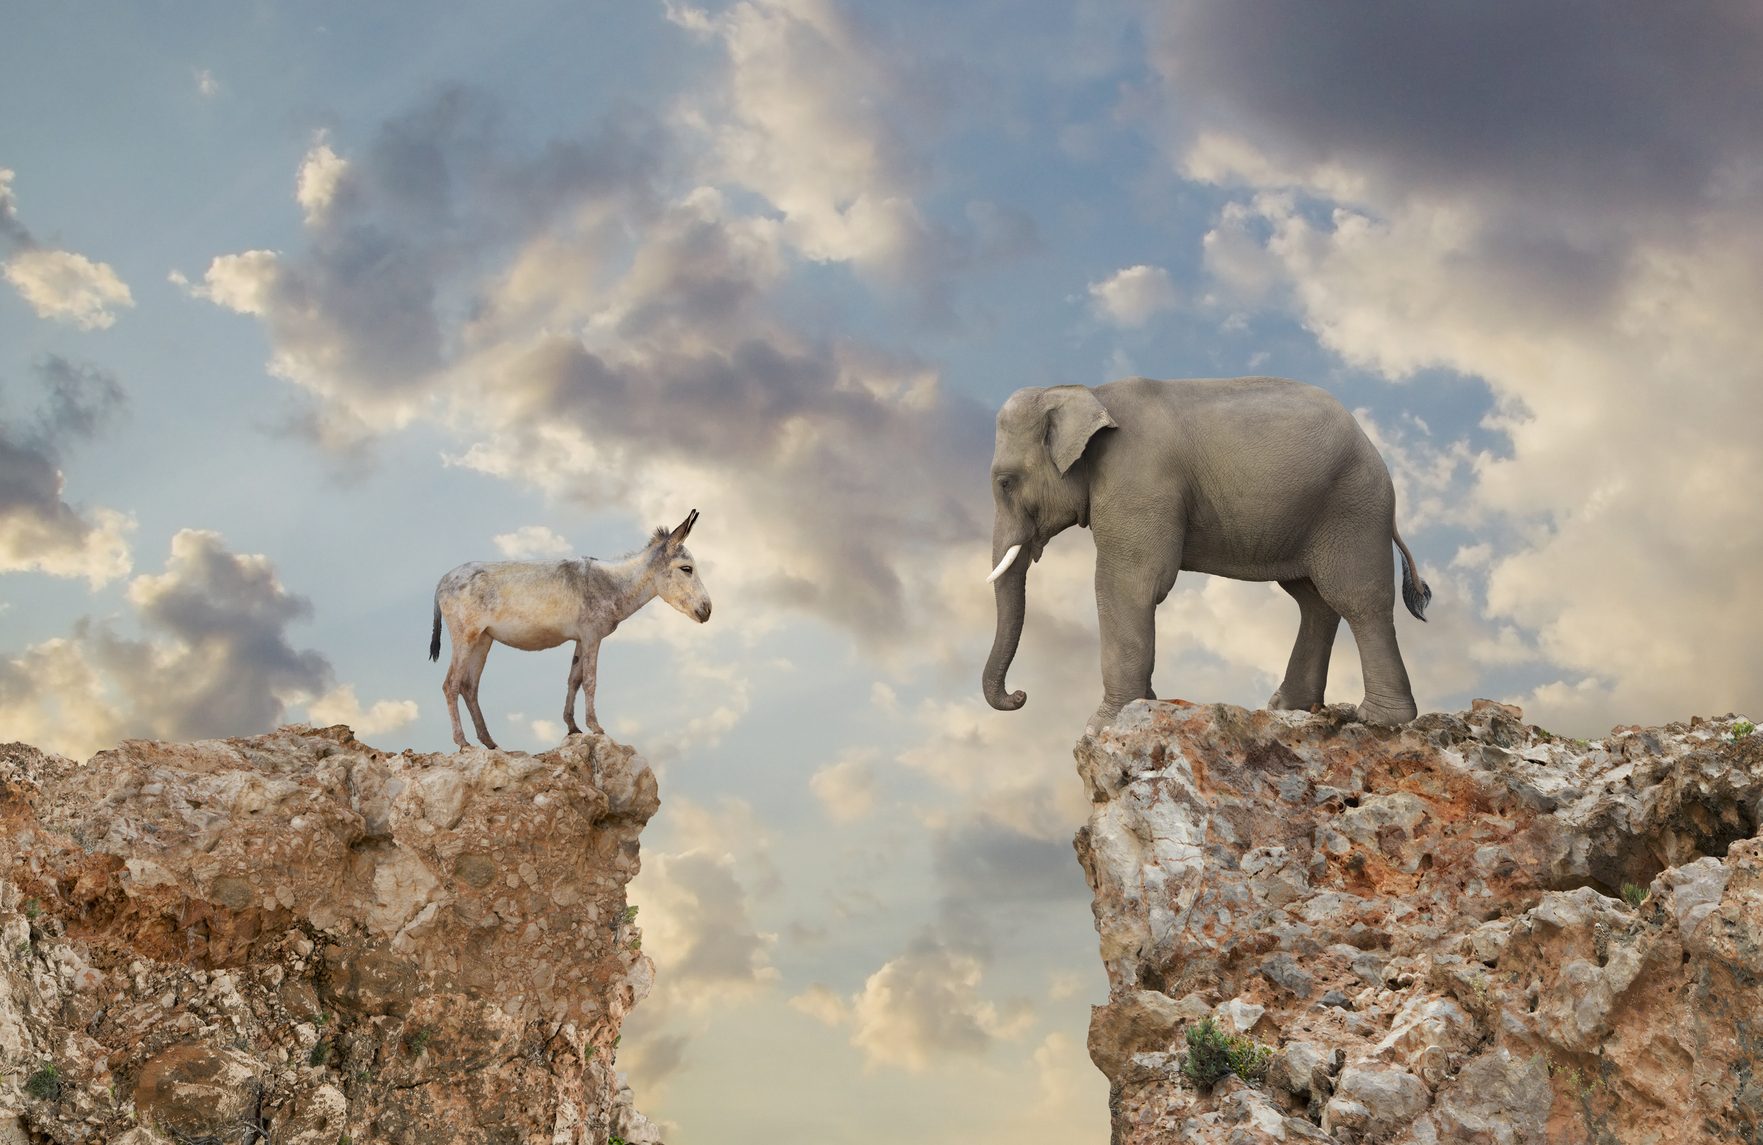 Donkey and elephant separated by gap in cliff